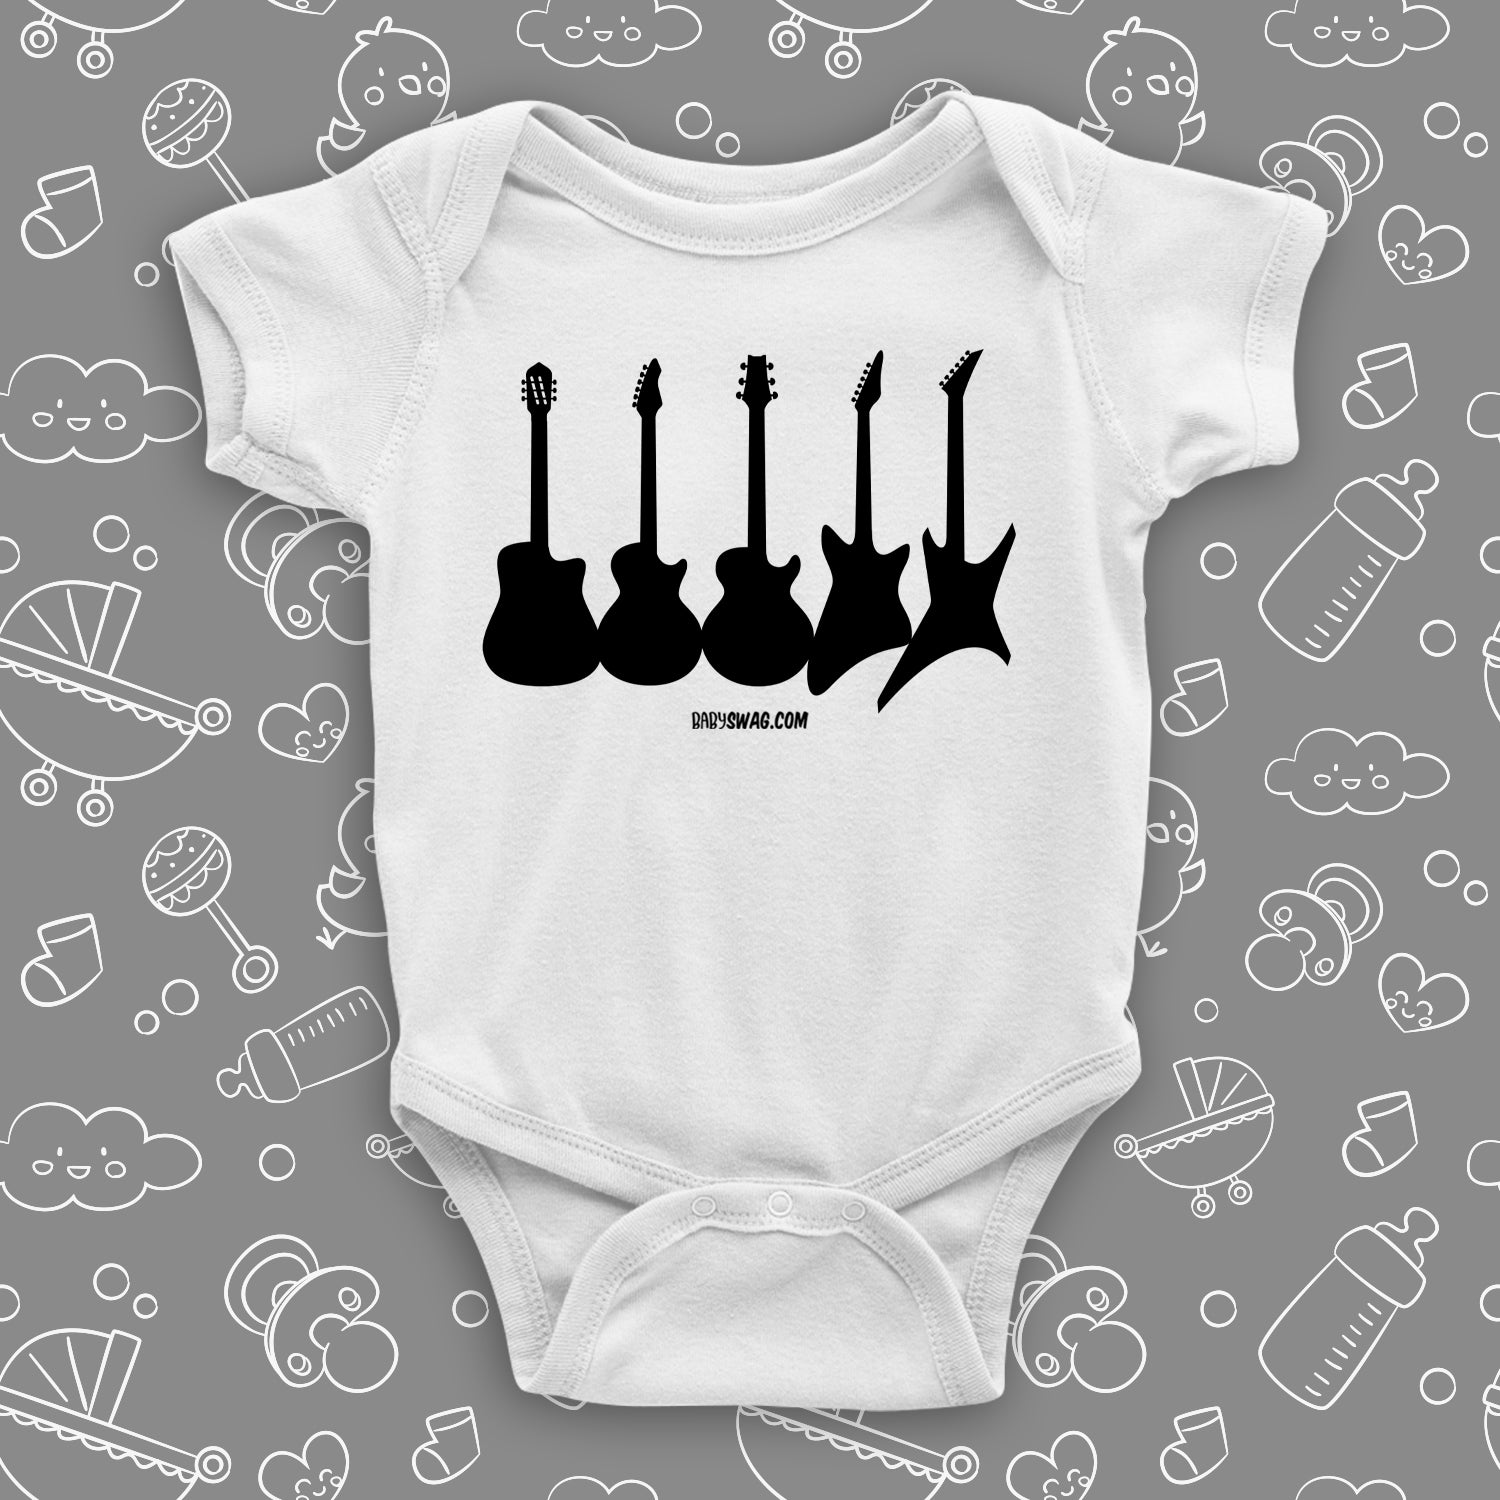 Rock N Roll onesie with saying "Guitar Collections" in white.